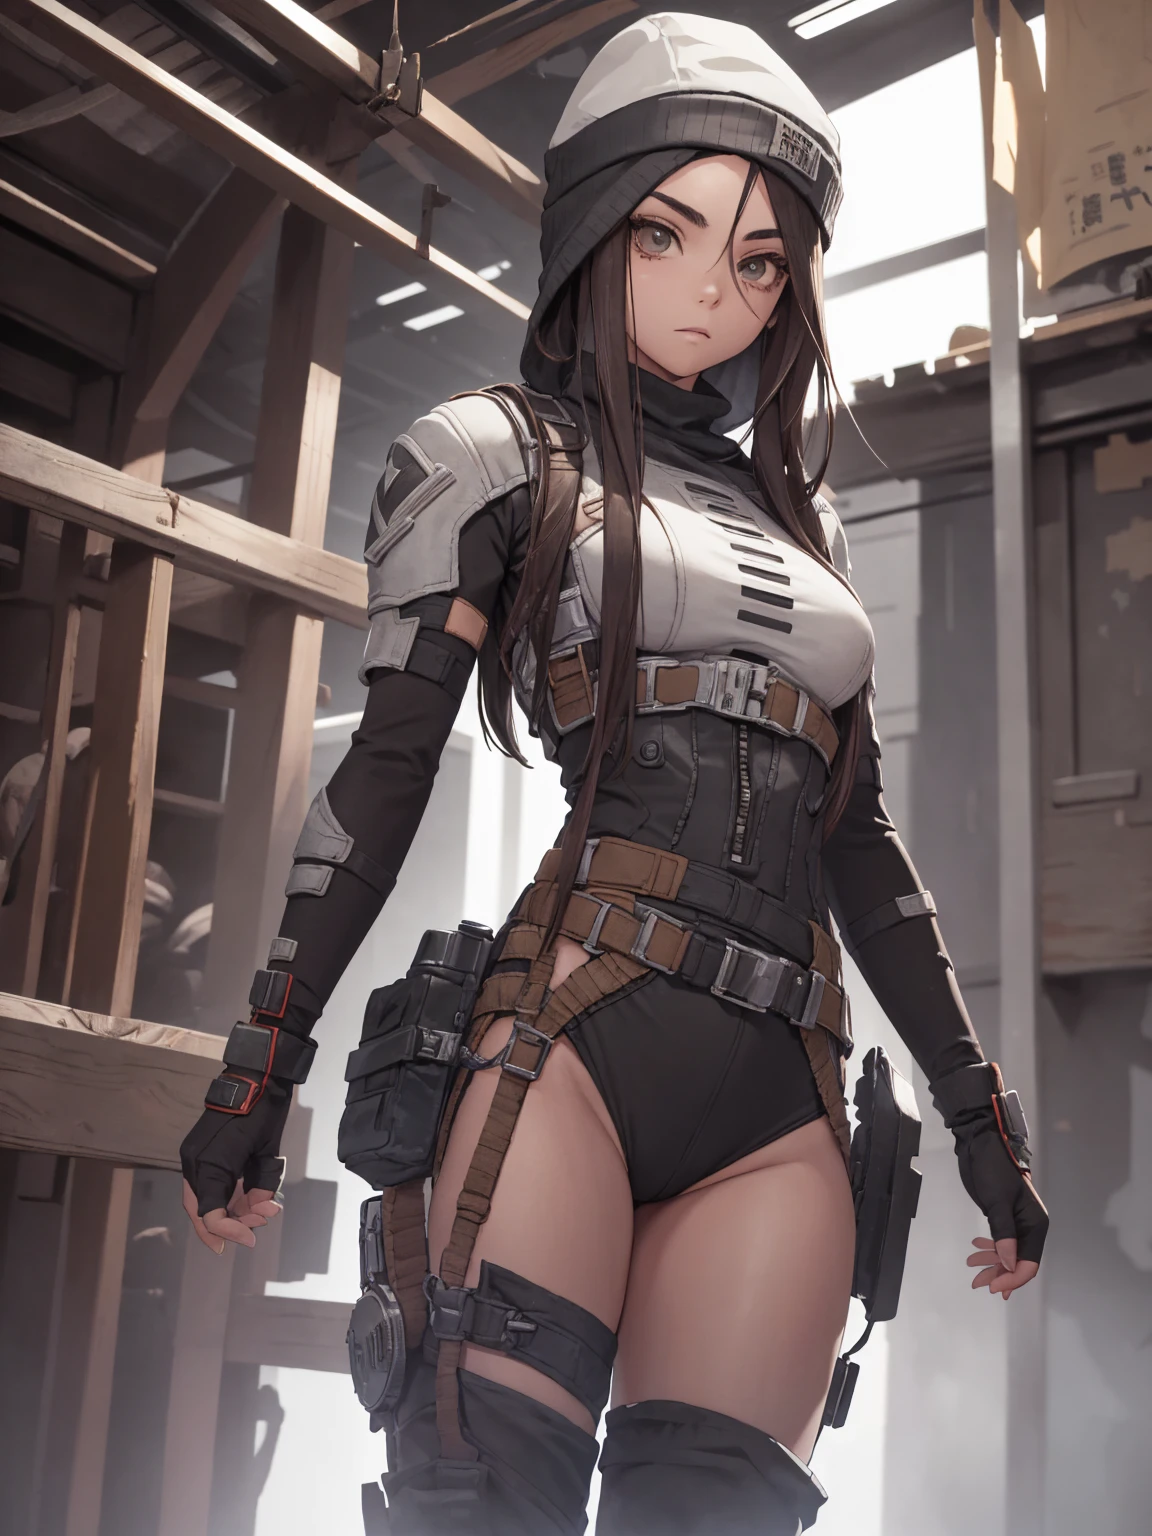 bonnet,waist belt,breasts big,Cybernetics,dental floss,cups,tagia alta,jaket,Microbiquíni,revealing clothing,shy,visible breasts, Kizi, (((standing alone))), pirralha violent, (((20 year))), sexly, pose de atitude, work of art, post-apocalypse, (((manga style))), Bounty Hunter, violent, Manic, the way you want, slenderbody, thin but strong, perfectbody, roupa moderna, advanced technology, neutral background, (( cowboy shot )). intricate visual